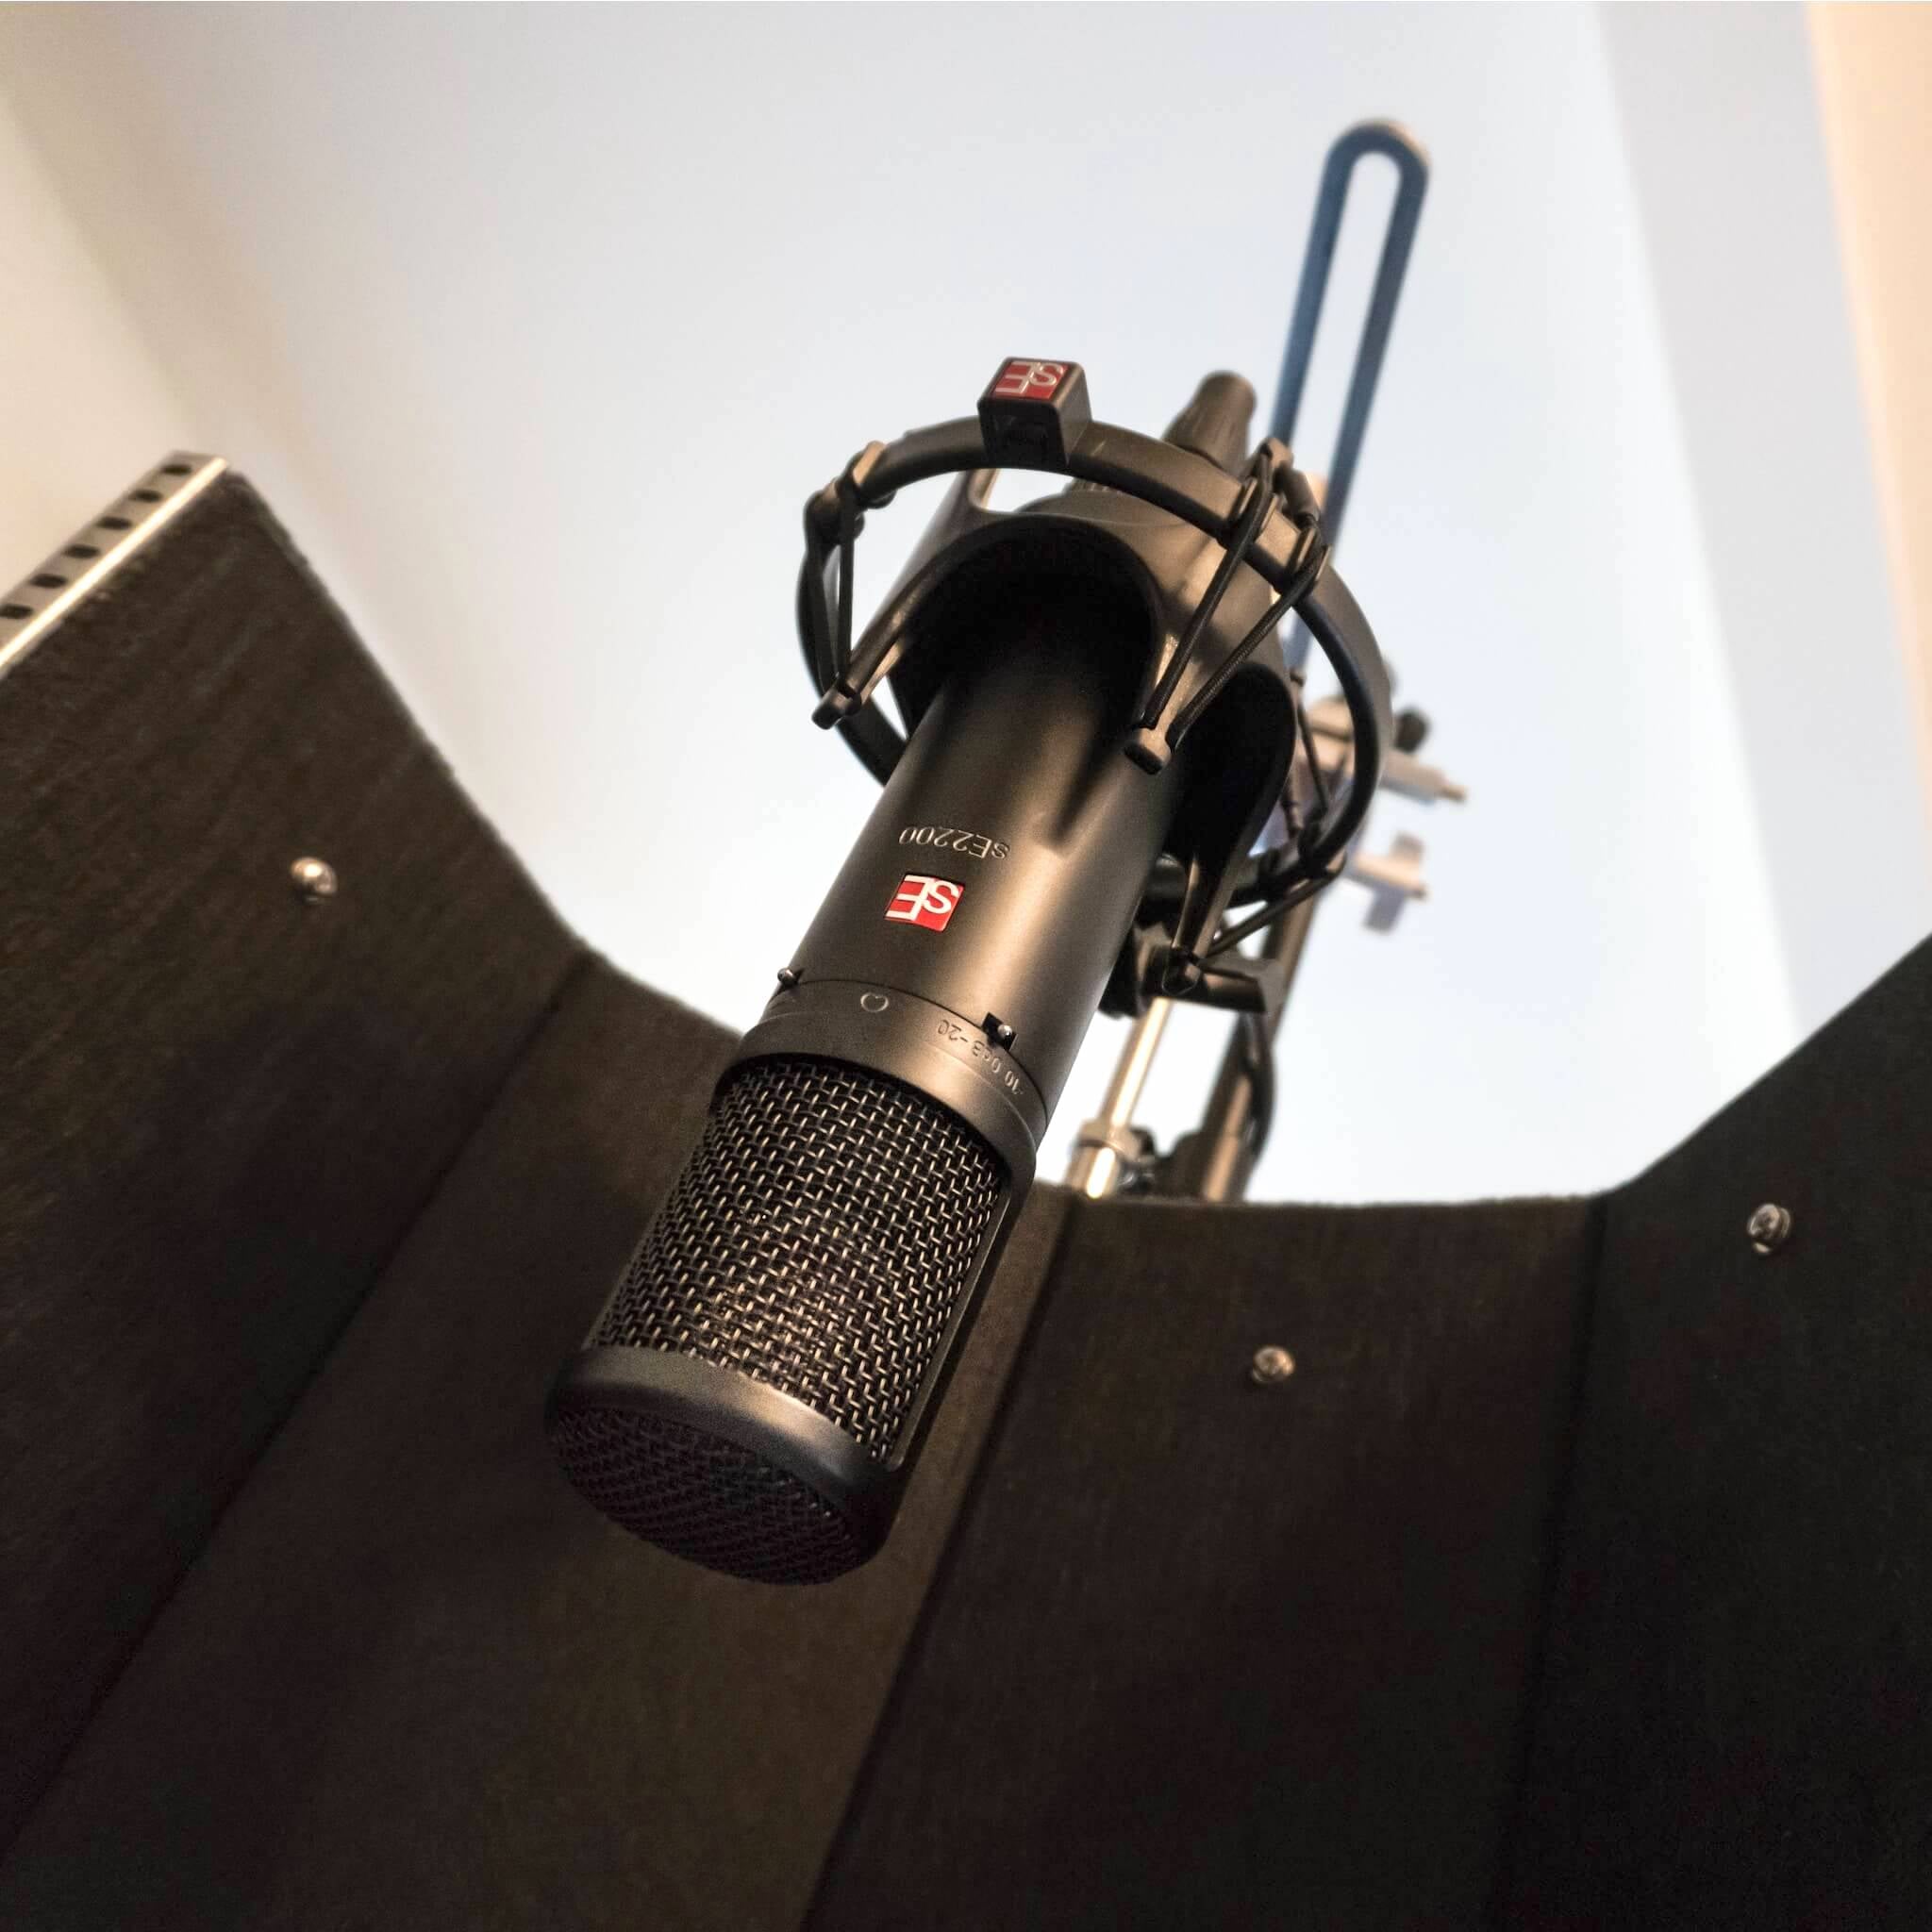 sE Electronics sE2200 - Large Diaphragm Cardioid Condenser Microphone, in use with a sound shield